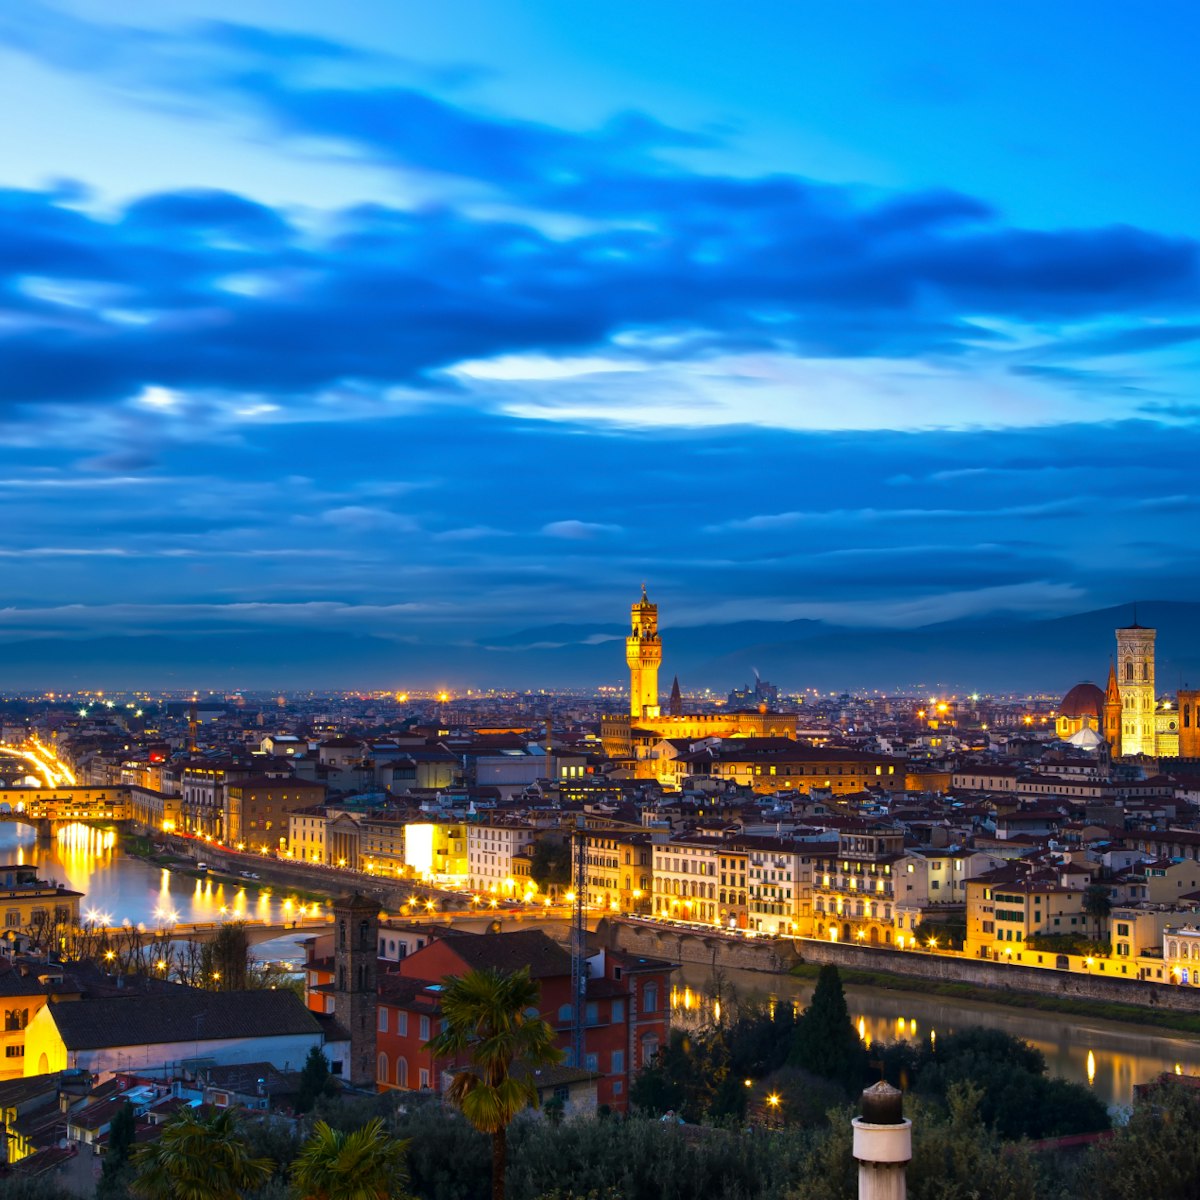 500px Photo ID: 139870999 - Florence or Firenze sunset aerial cityscape. Panorama view from Michelangelo park square. From left Palazzo Vecchio and Duomo Cathedral. Italy